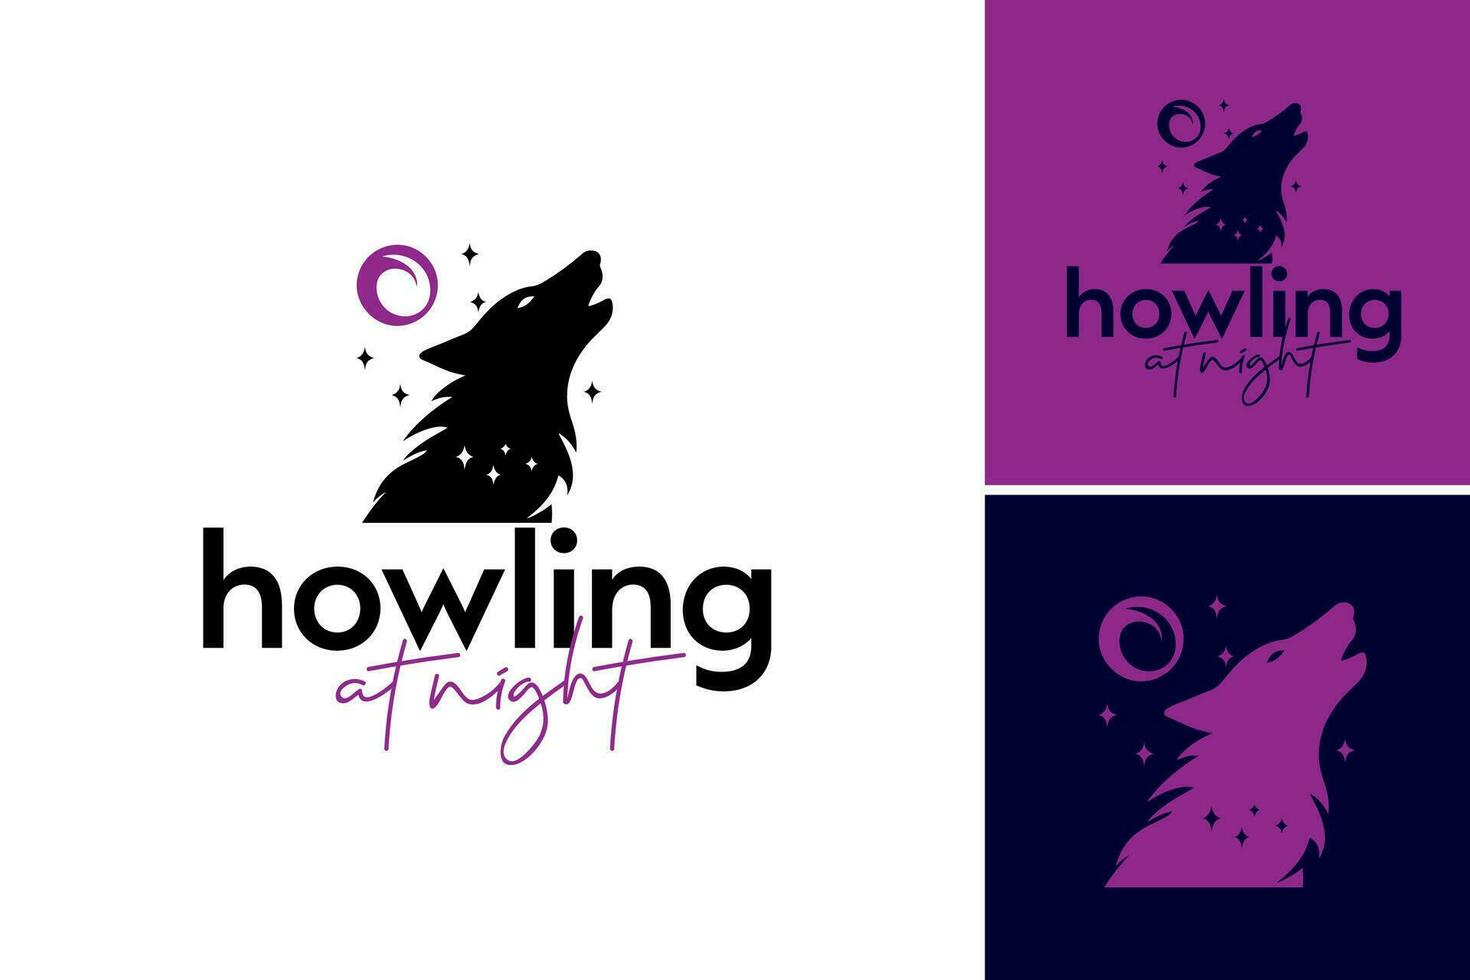 howling at night logo design template.this a suitable asset for businesses or brands related to nightlife, music, or entertainment industries. vector